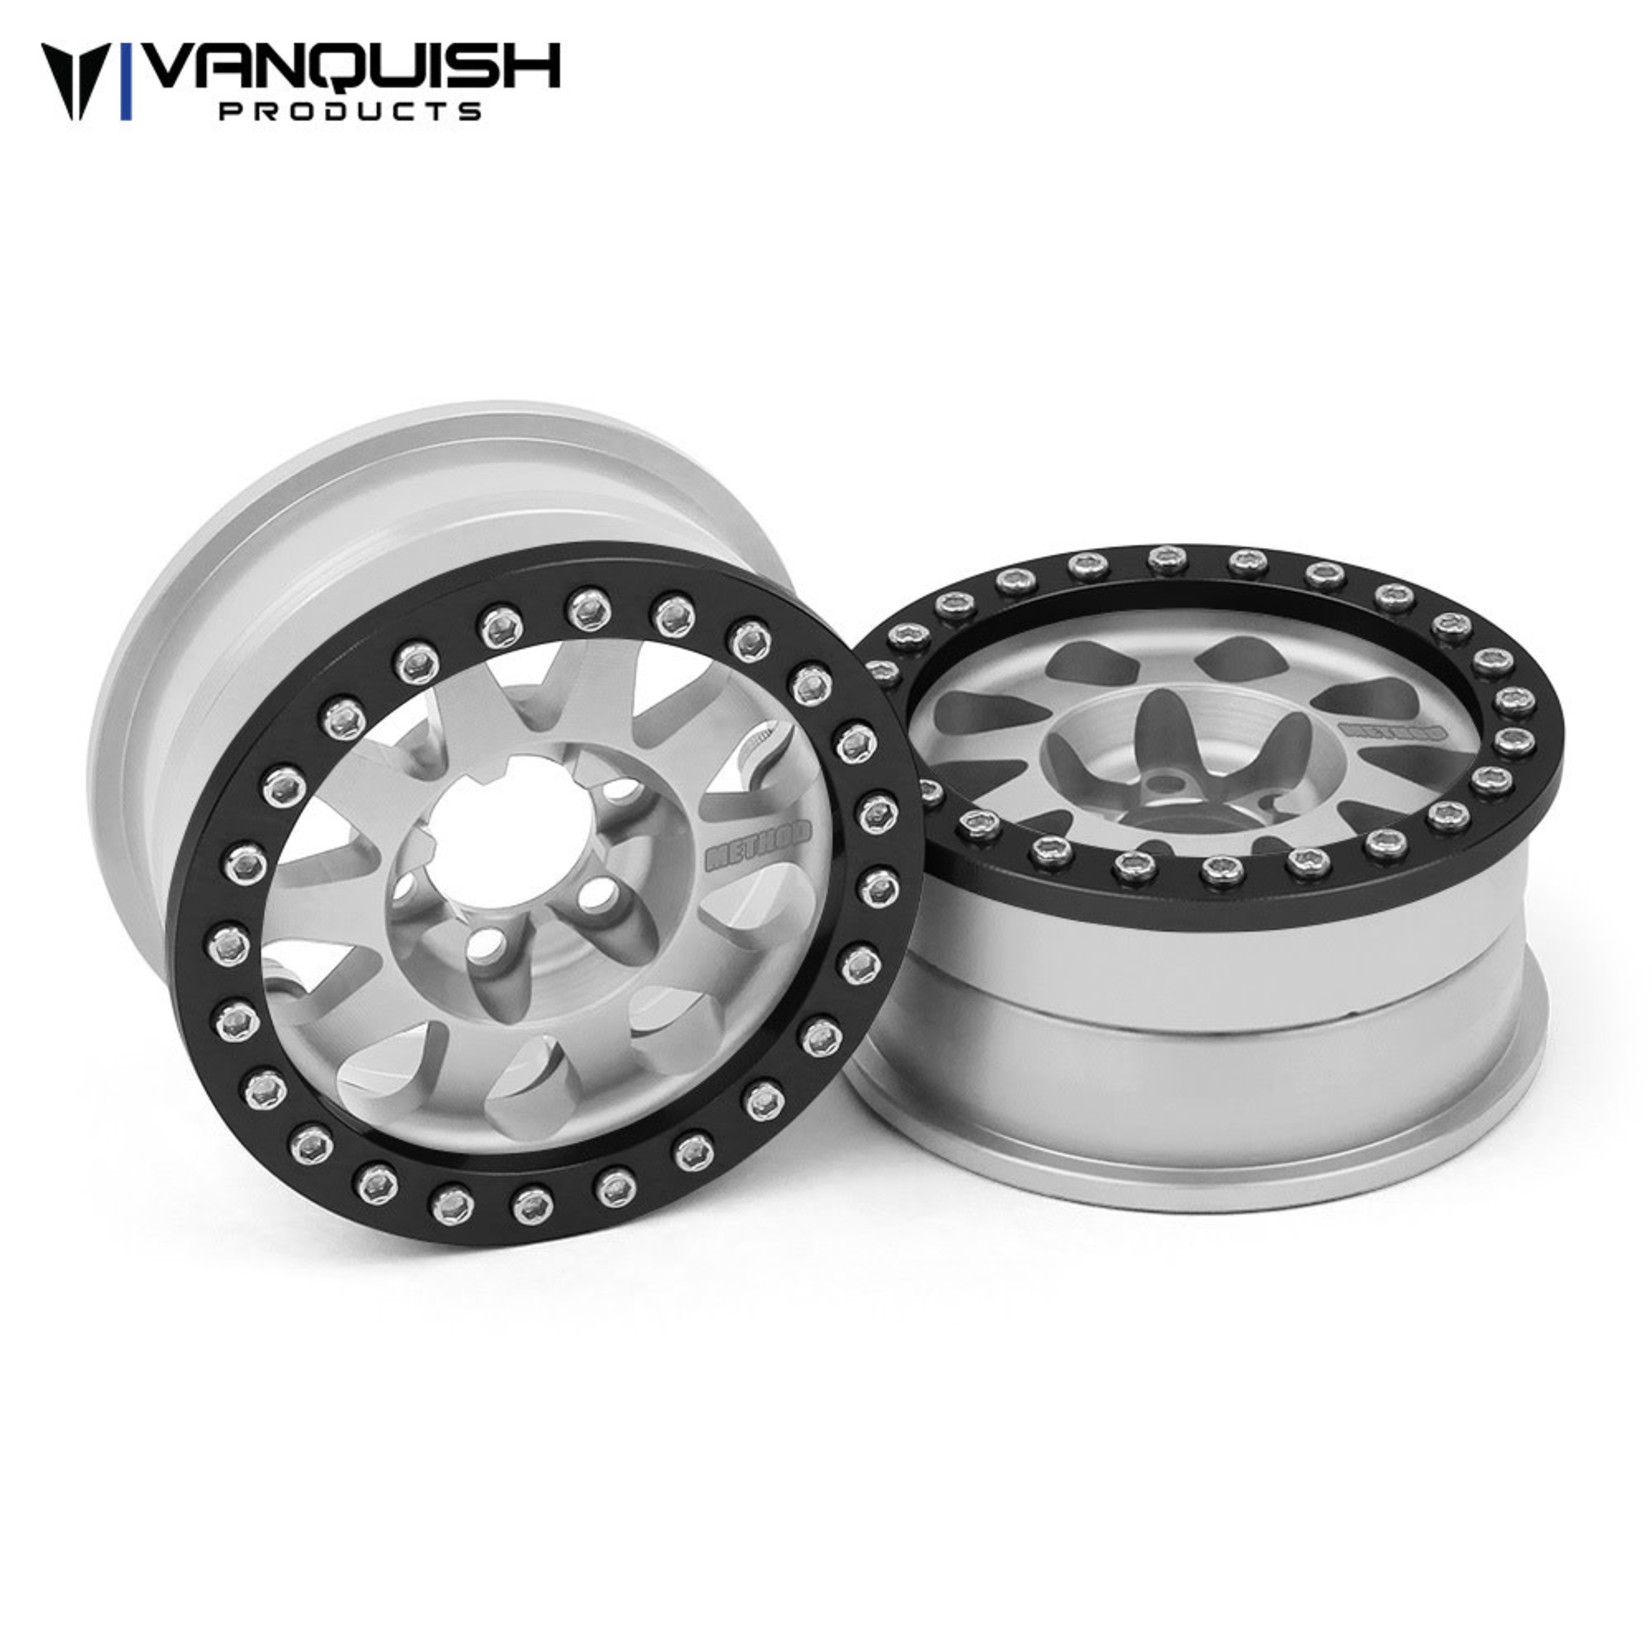 Vanquish RC 1.9 Method Race Wheel 101 Clear Anodized V2 (2)